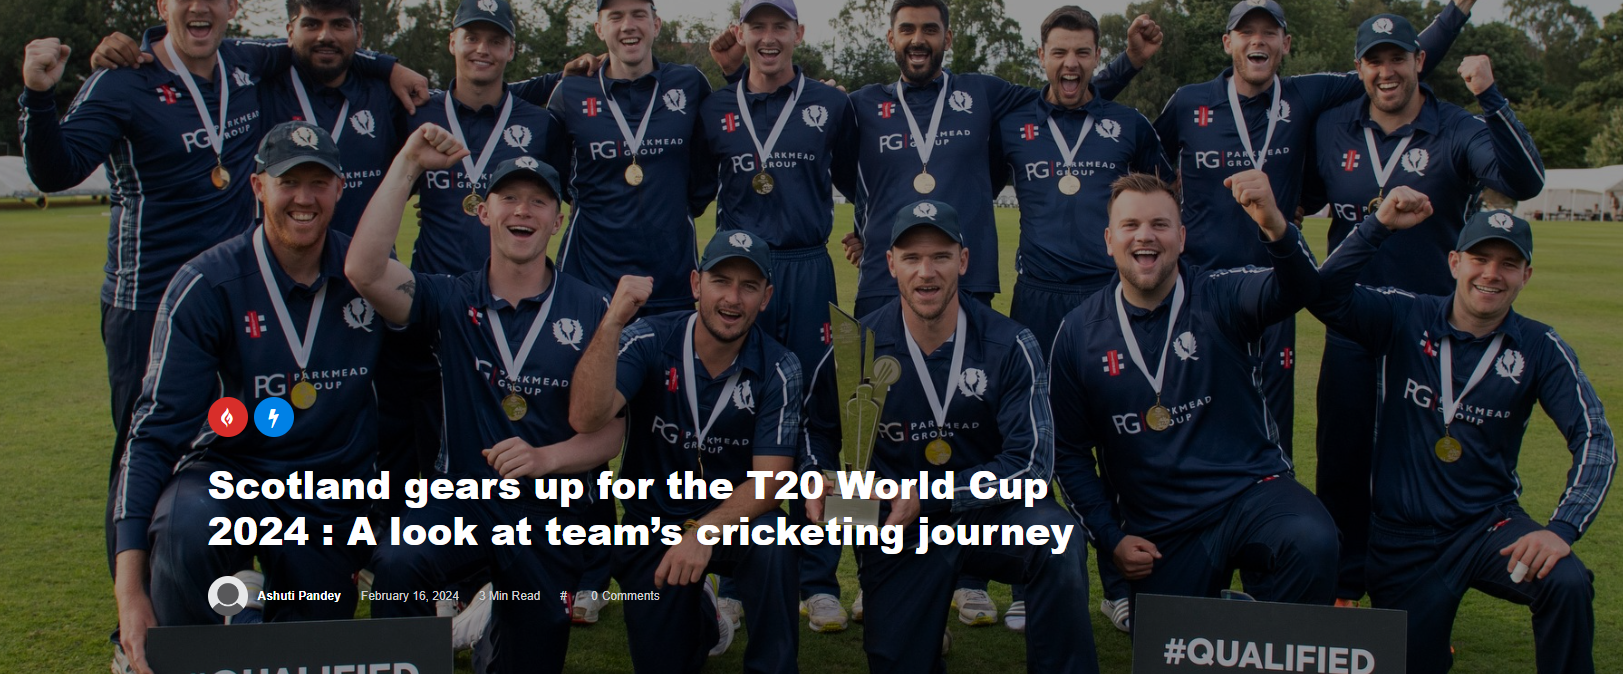 Scotland cricket team players celebrating a wicket during a match.